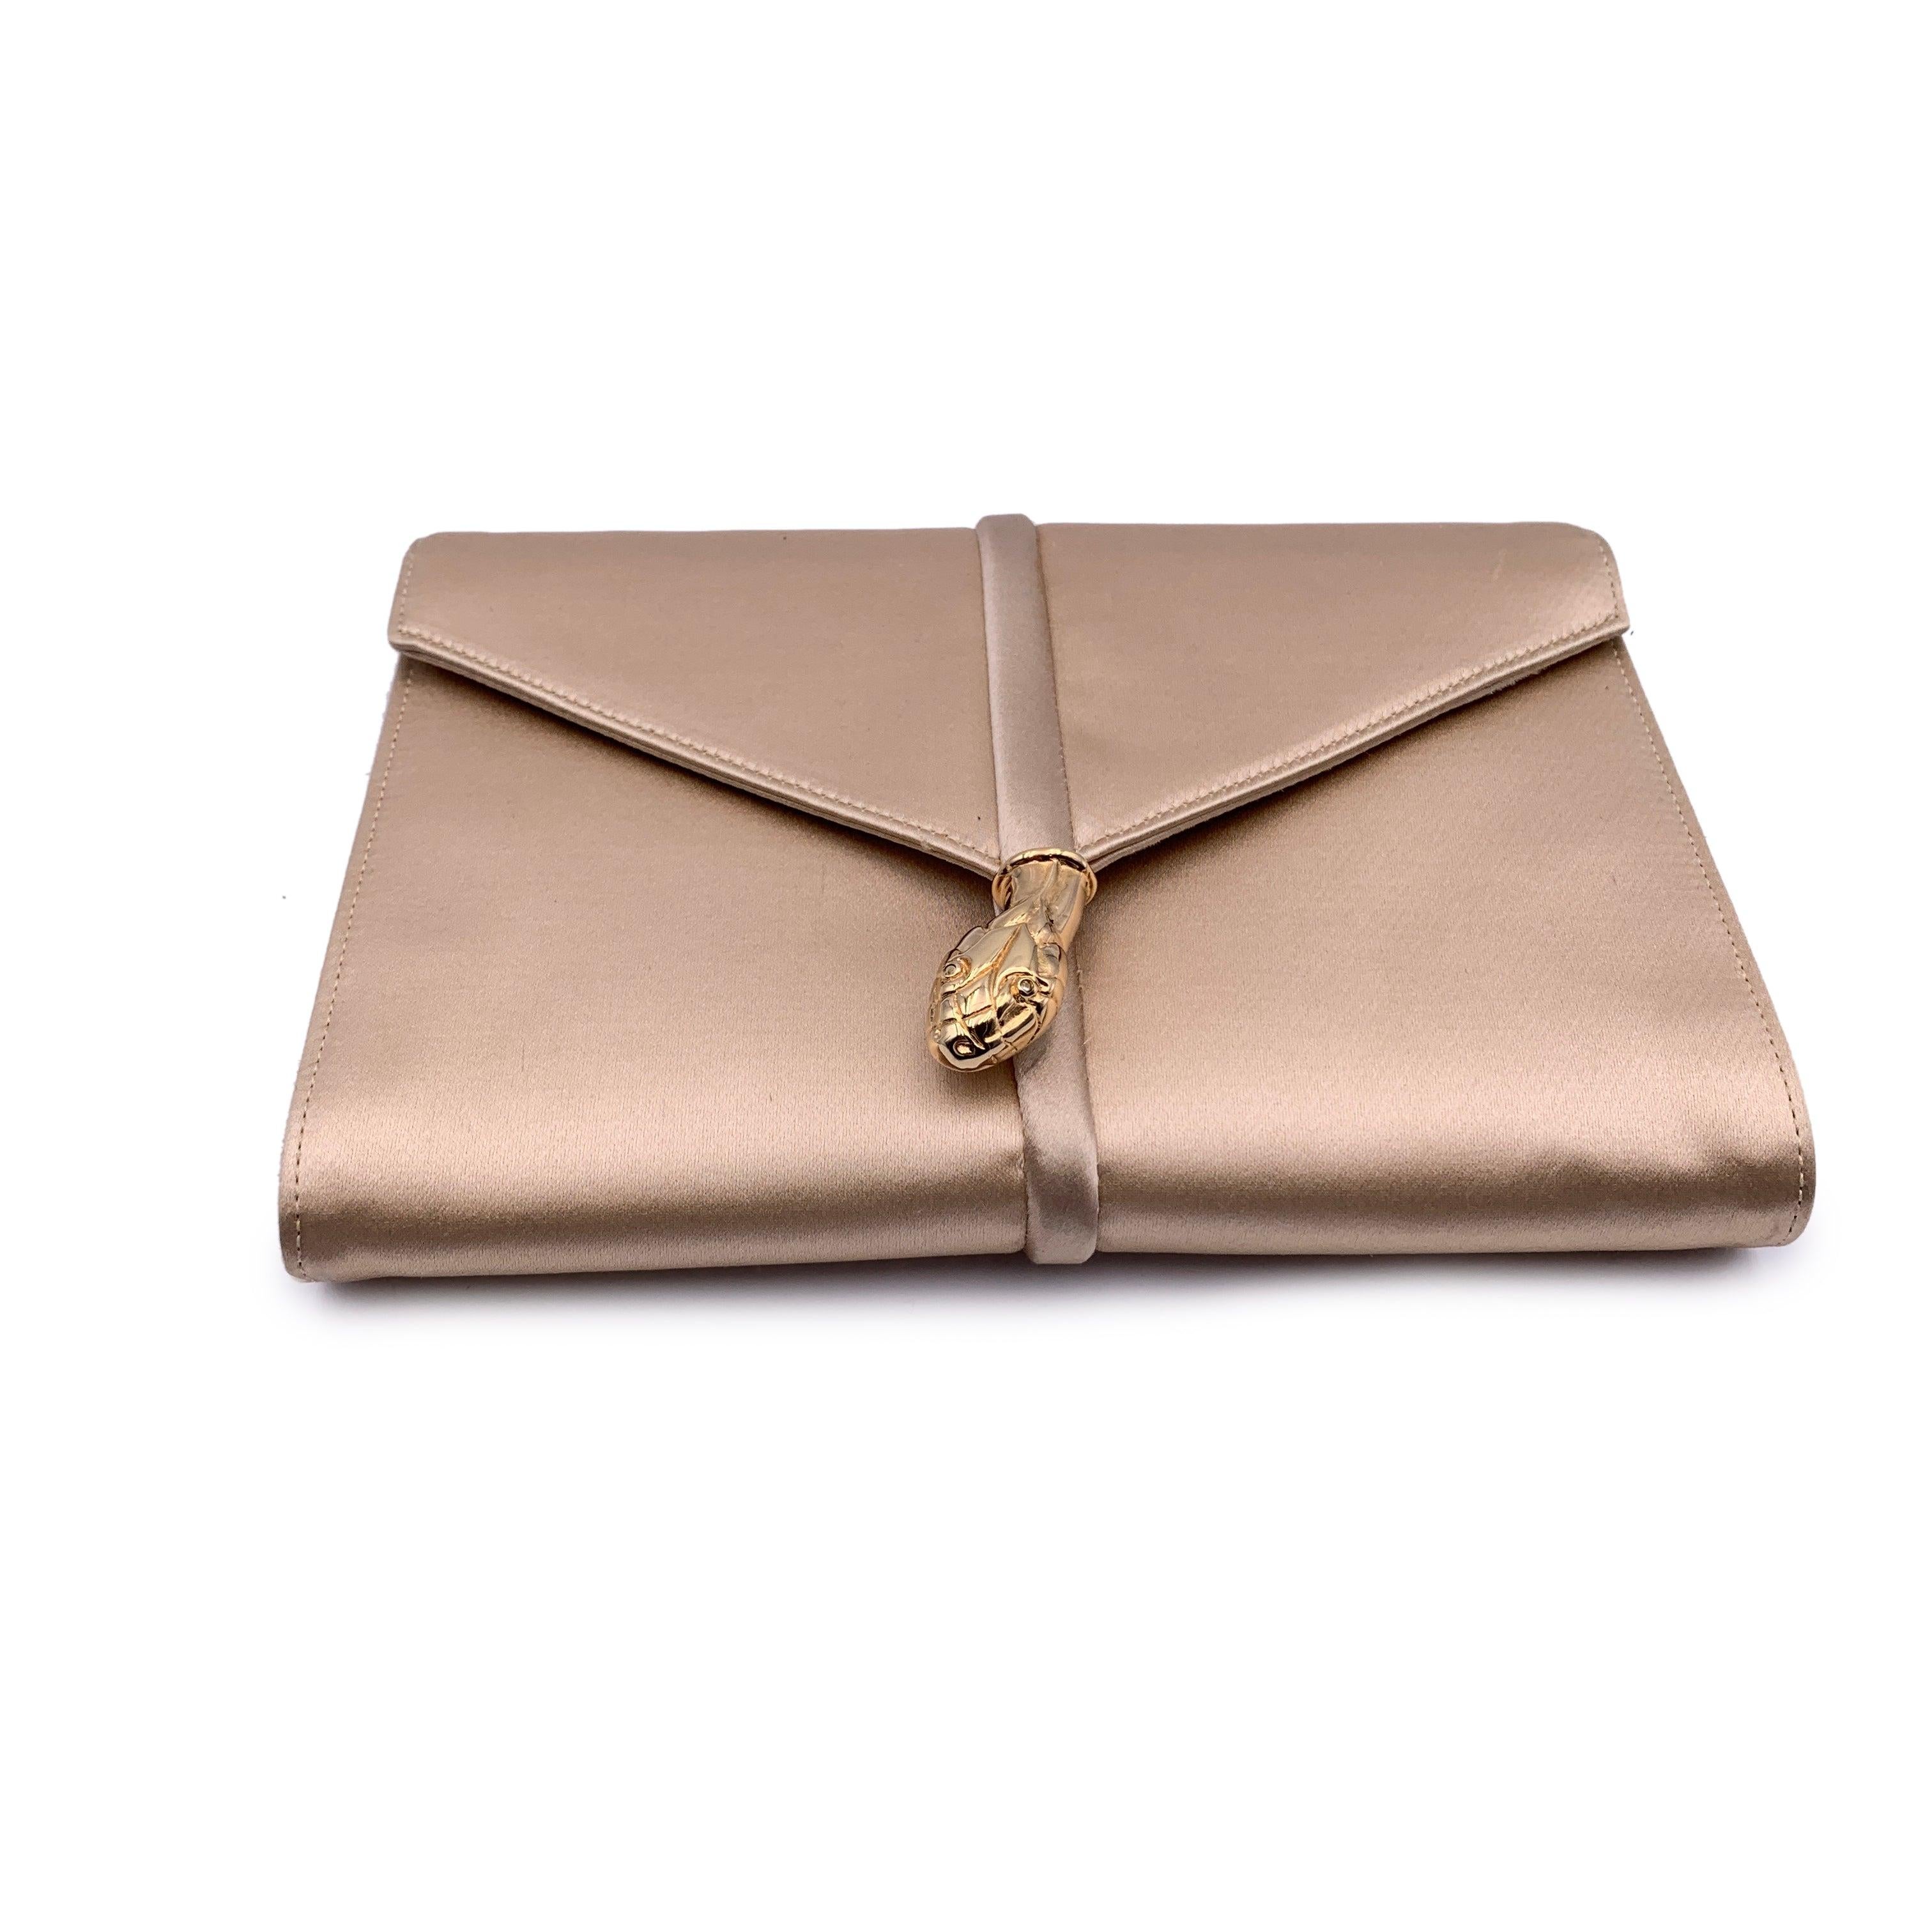 Yves Saint Laurent Vintage Beige Satin Snake Heads Clutch Bag In Excellent Condition For Sale In Rome, Rome